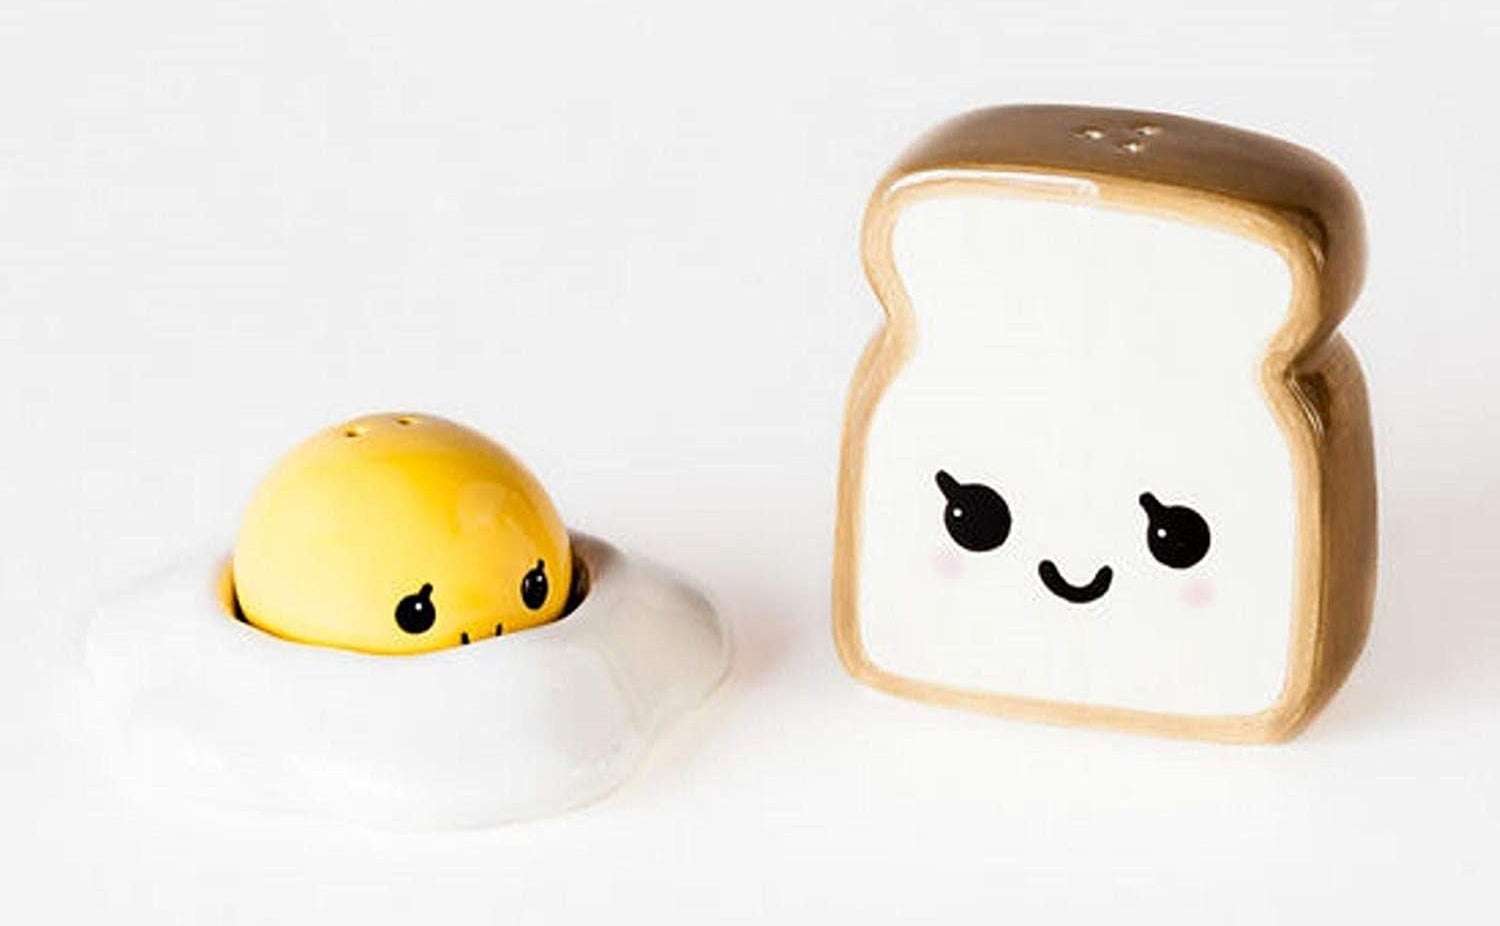 The toast and egg shakers which have eyes and a mouth. The egg is two parts: a yolk which attaches the egg white via a magnet